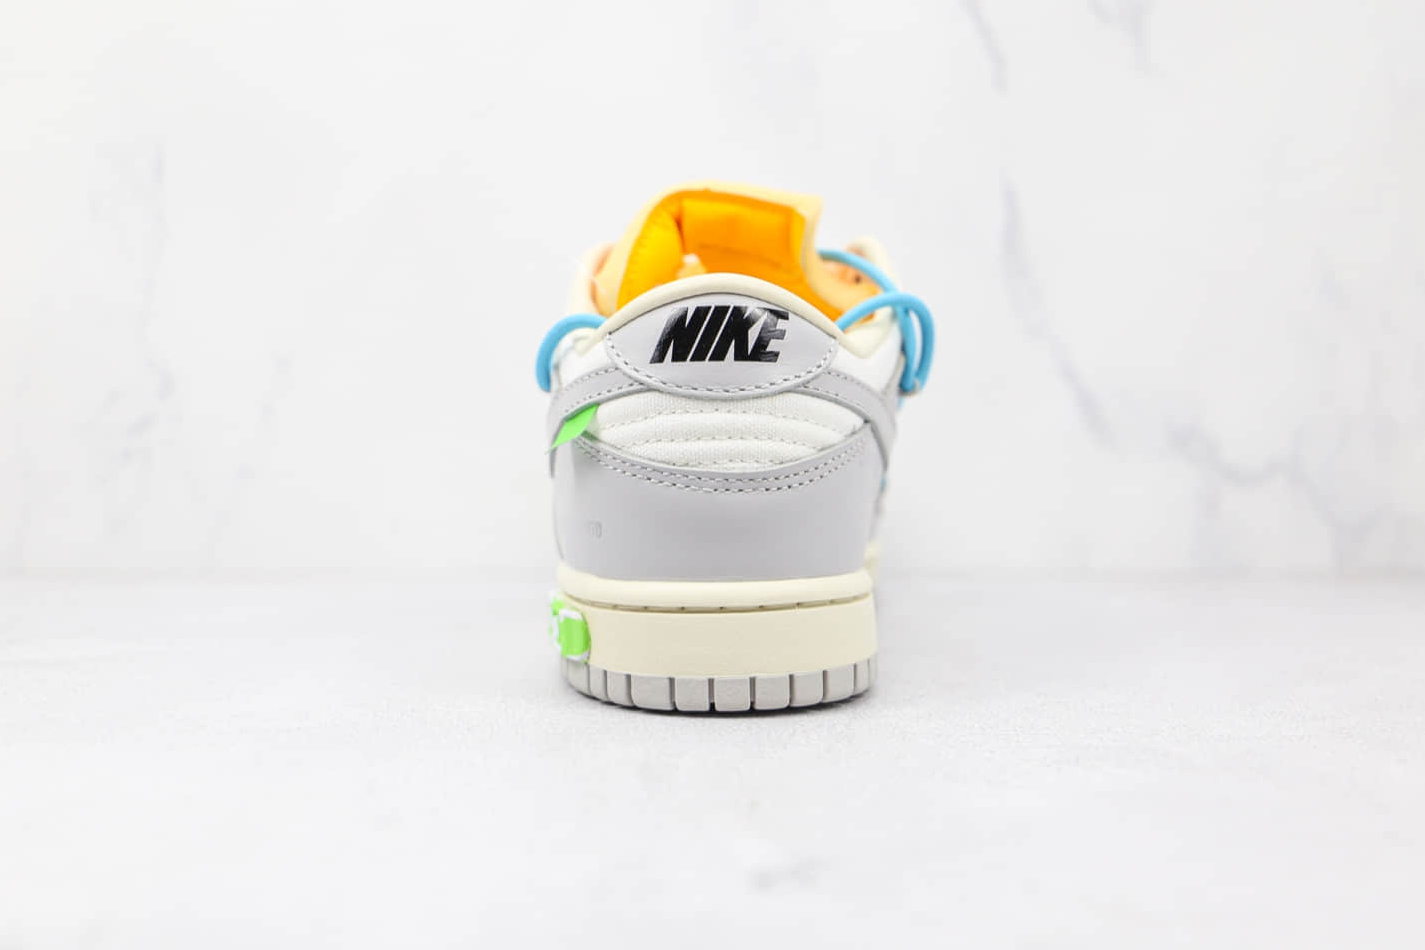 Nike Off-White x Dunk Low 'Lot 02 of 50' DM1602-115 - Exclusive Limited Edition Collaboration